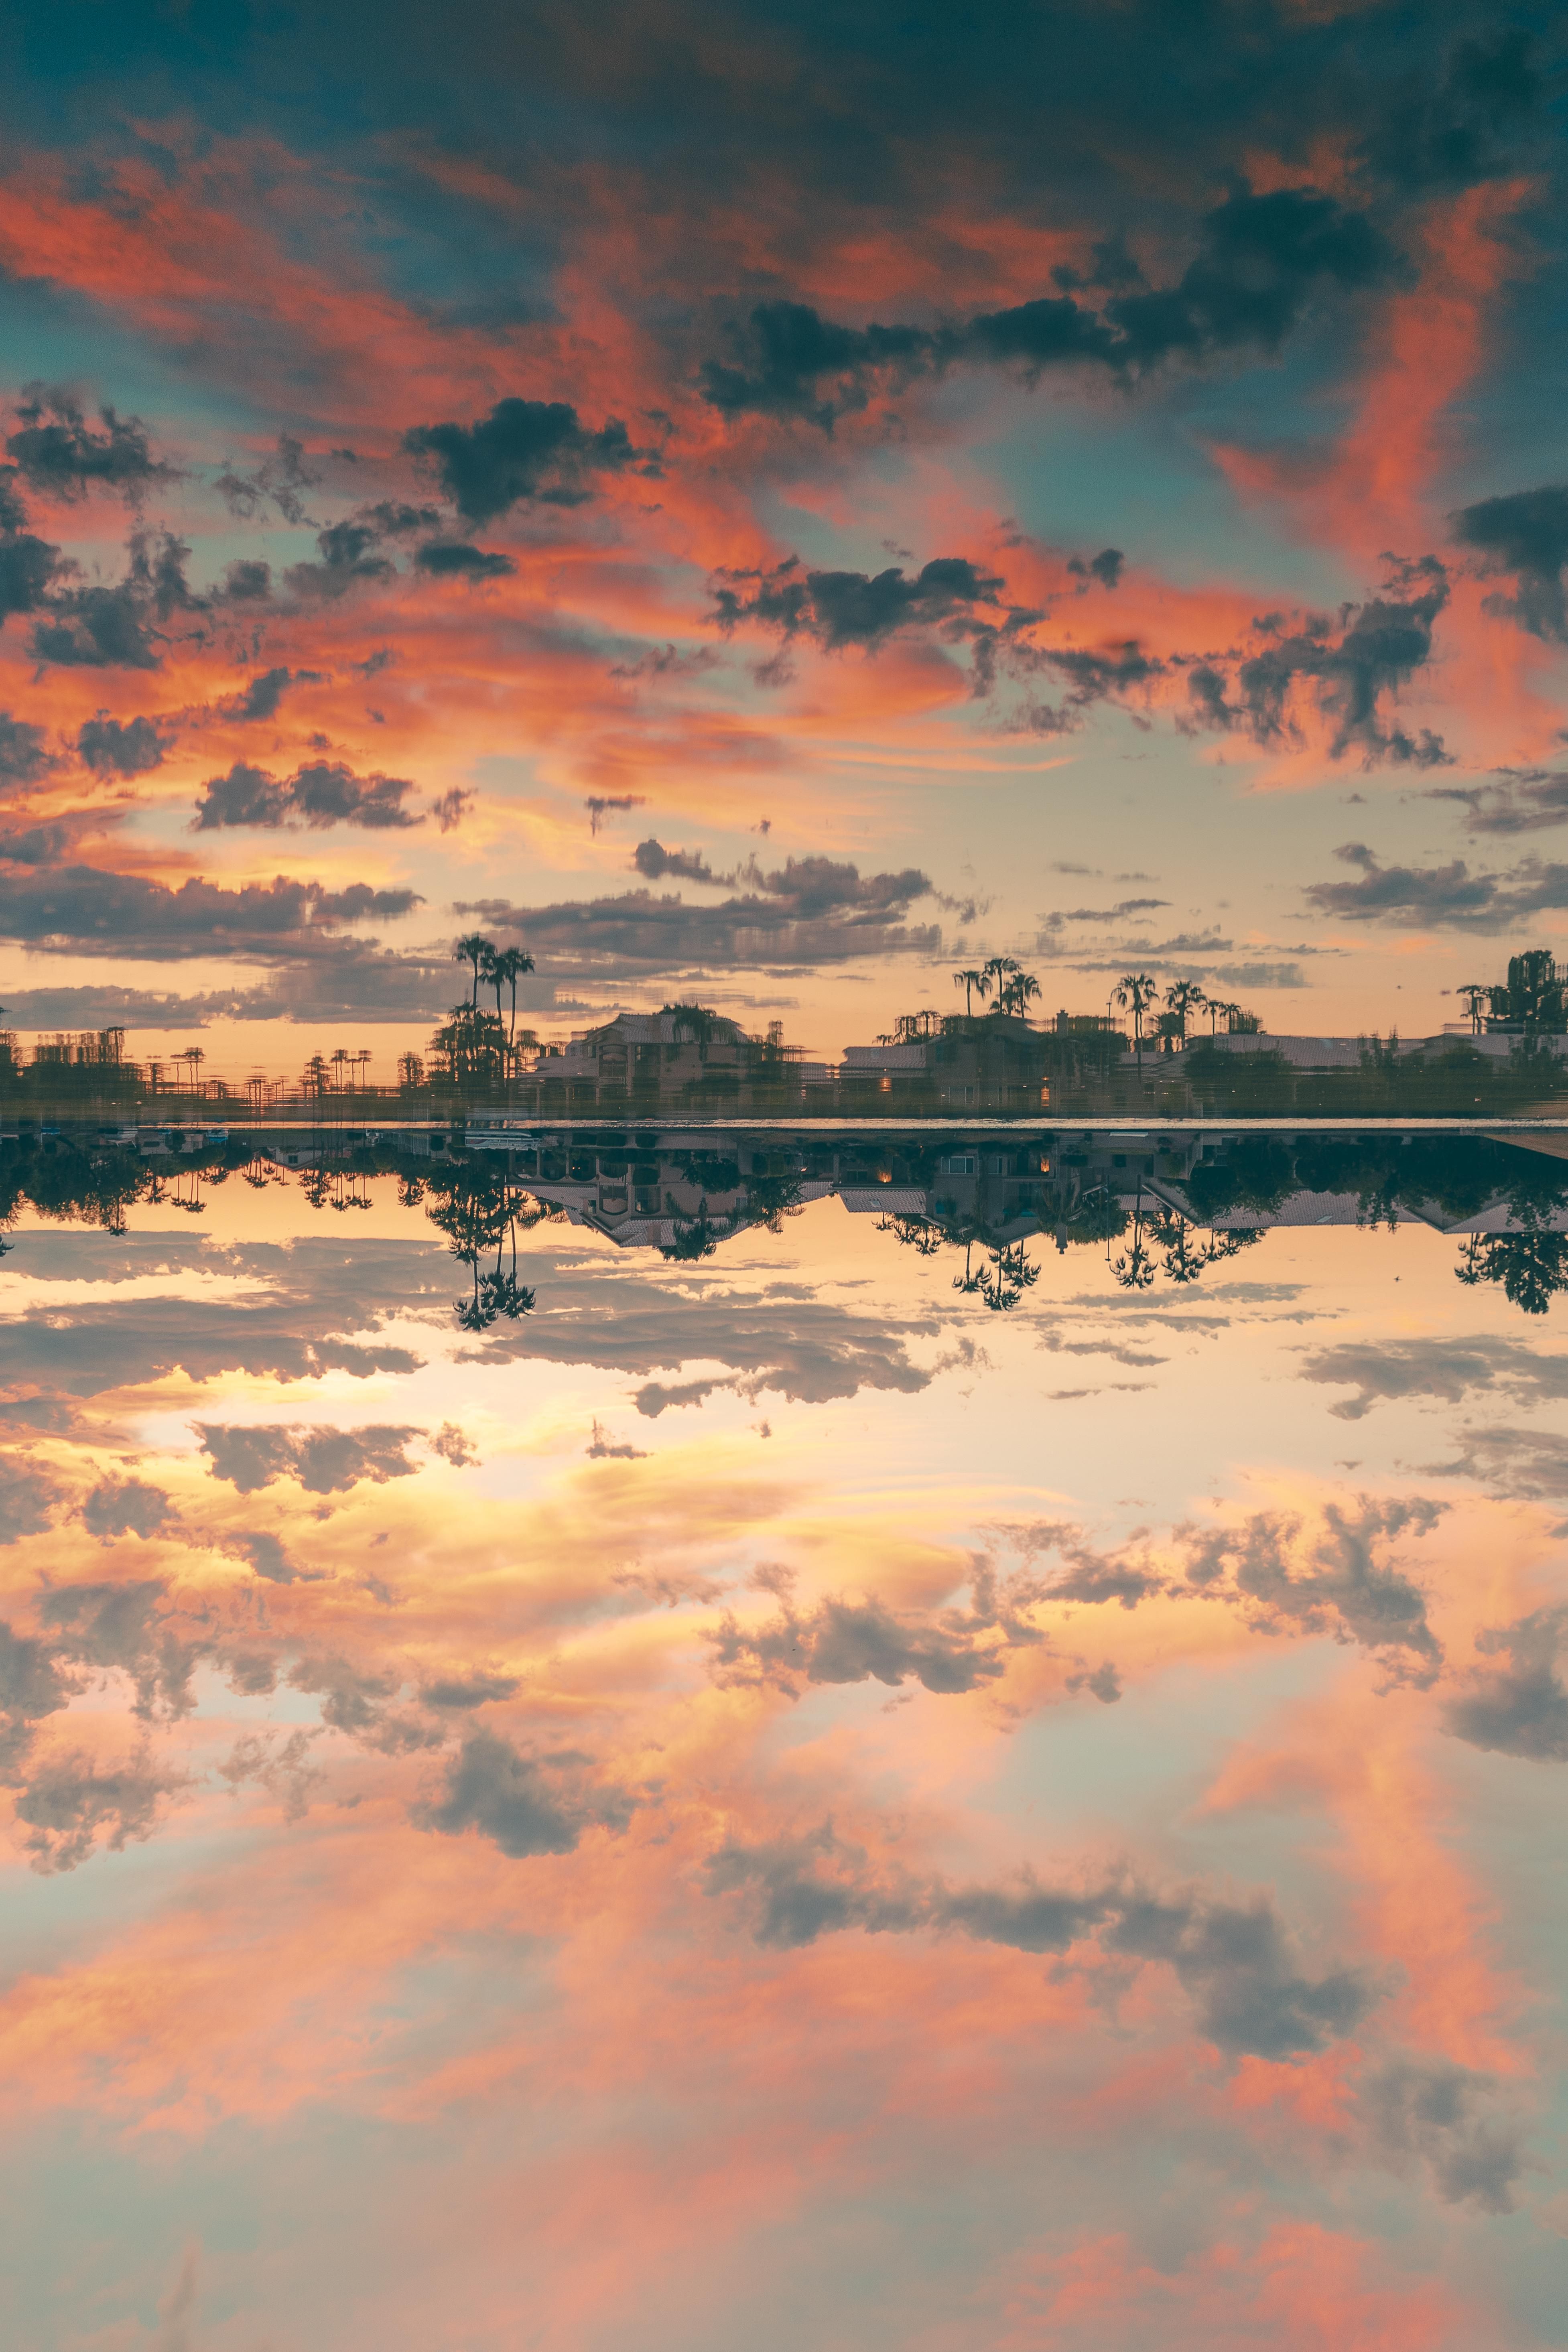 A sunset over the water with clouds in it - Sunrise, lake